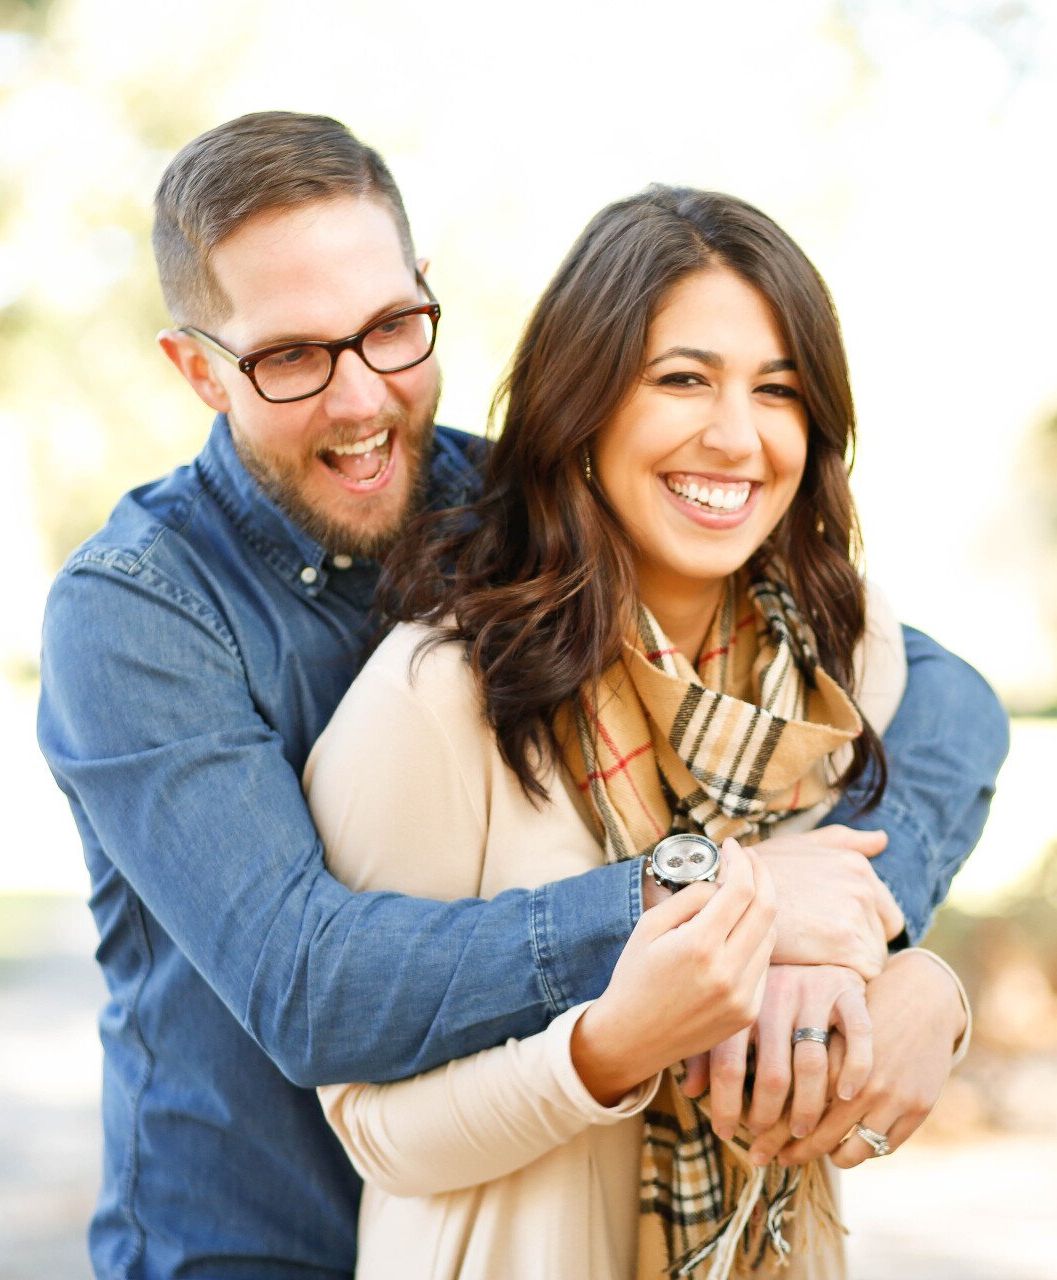 Couple smiling and holding each other | Dental implant services in Metairie LA 70002